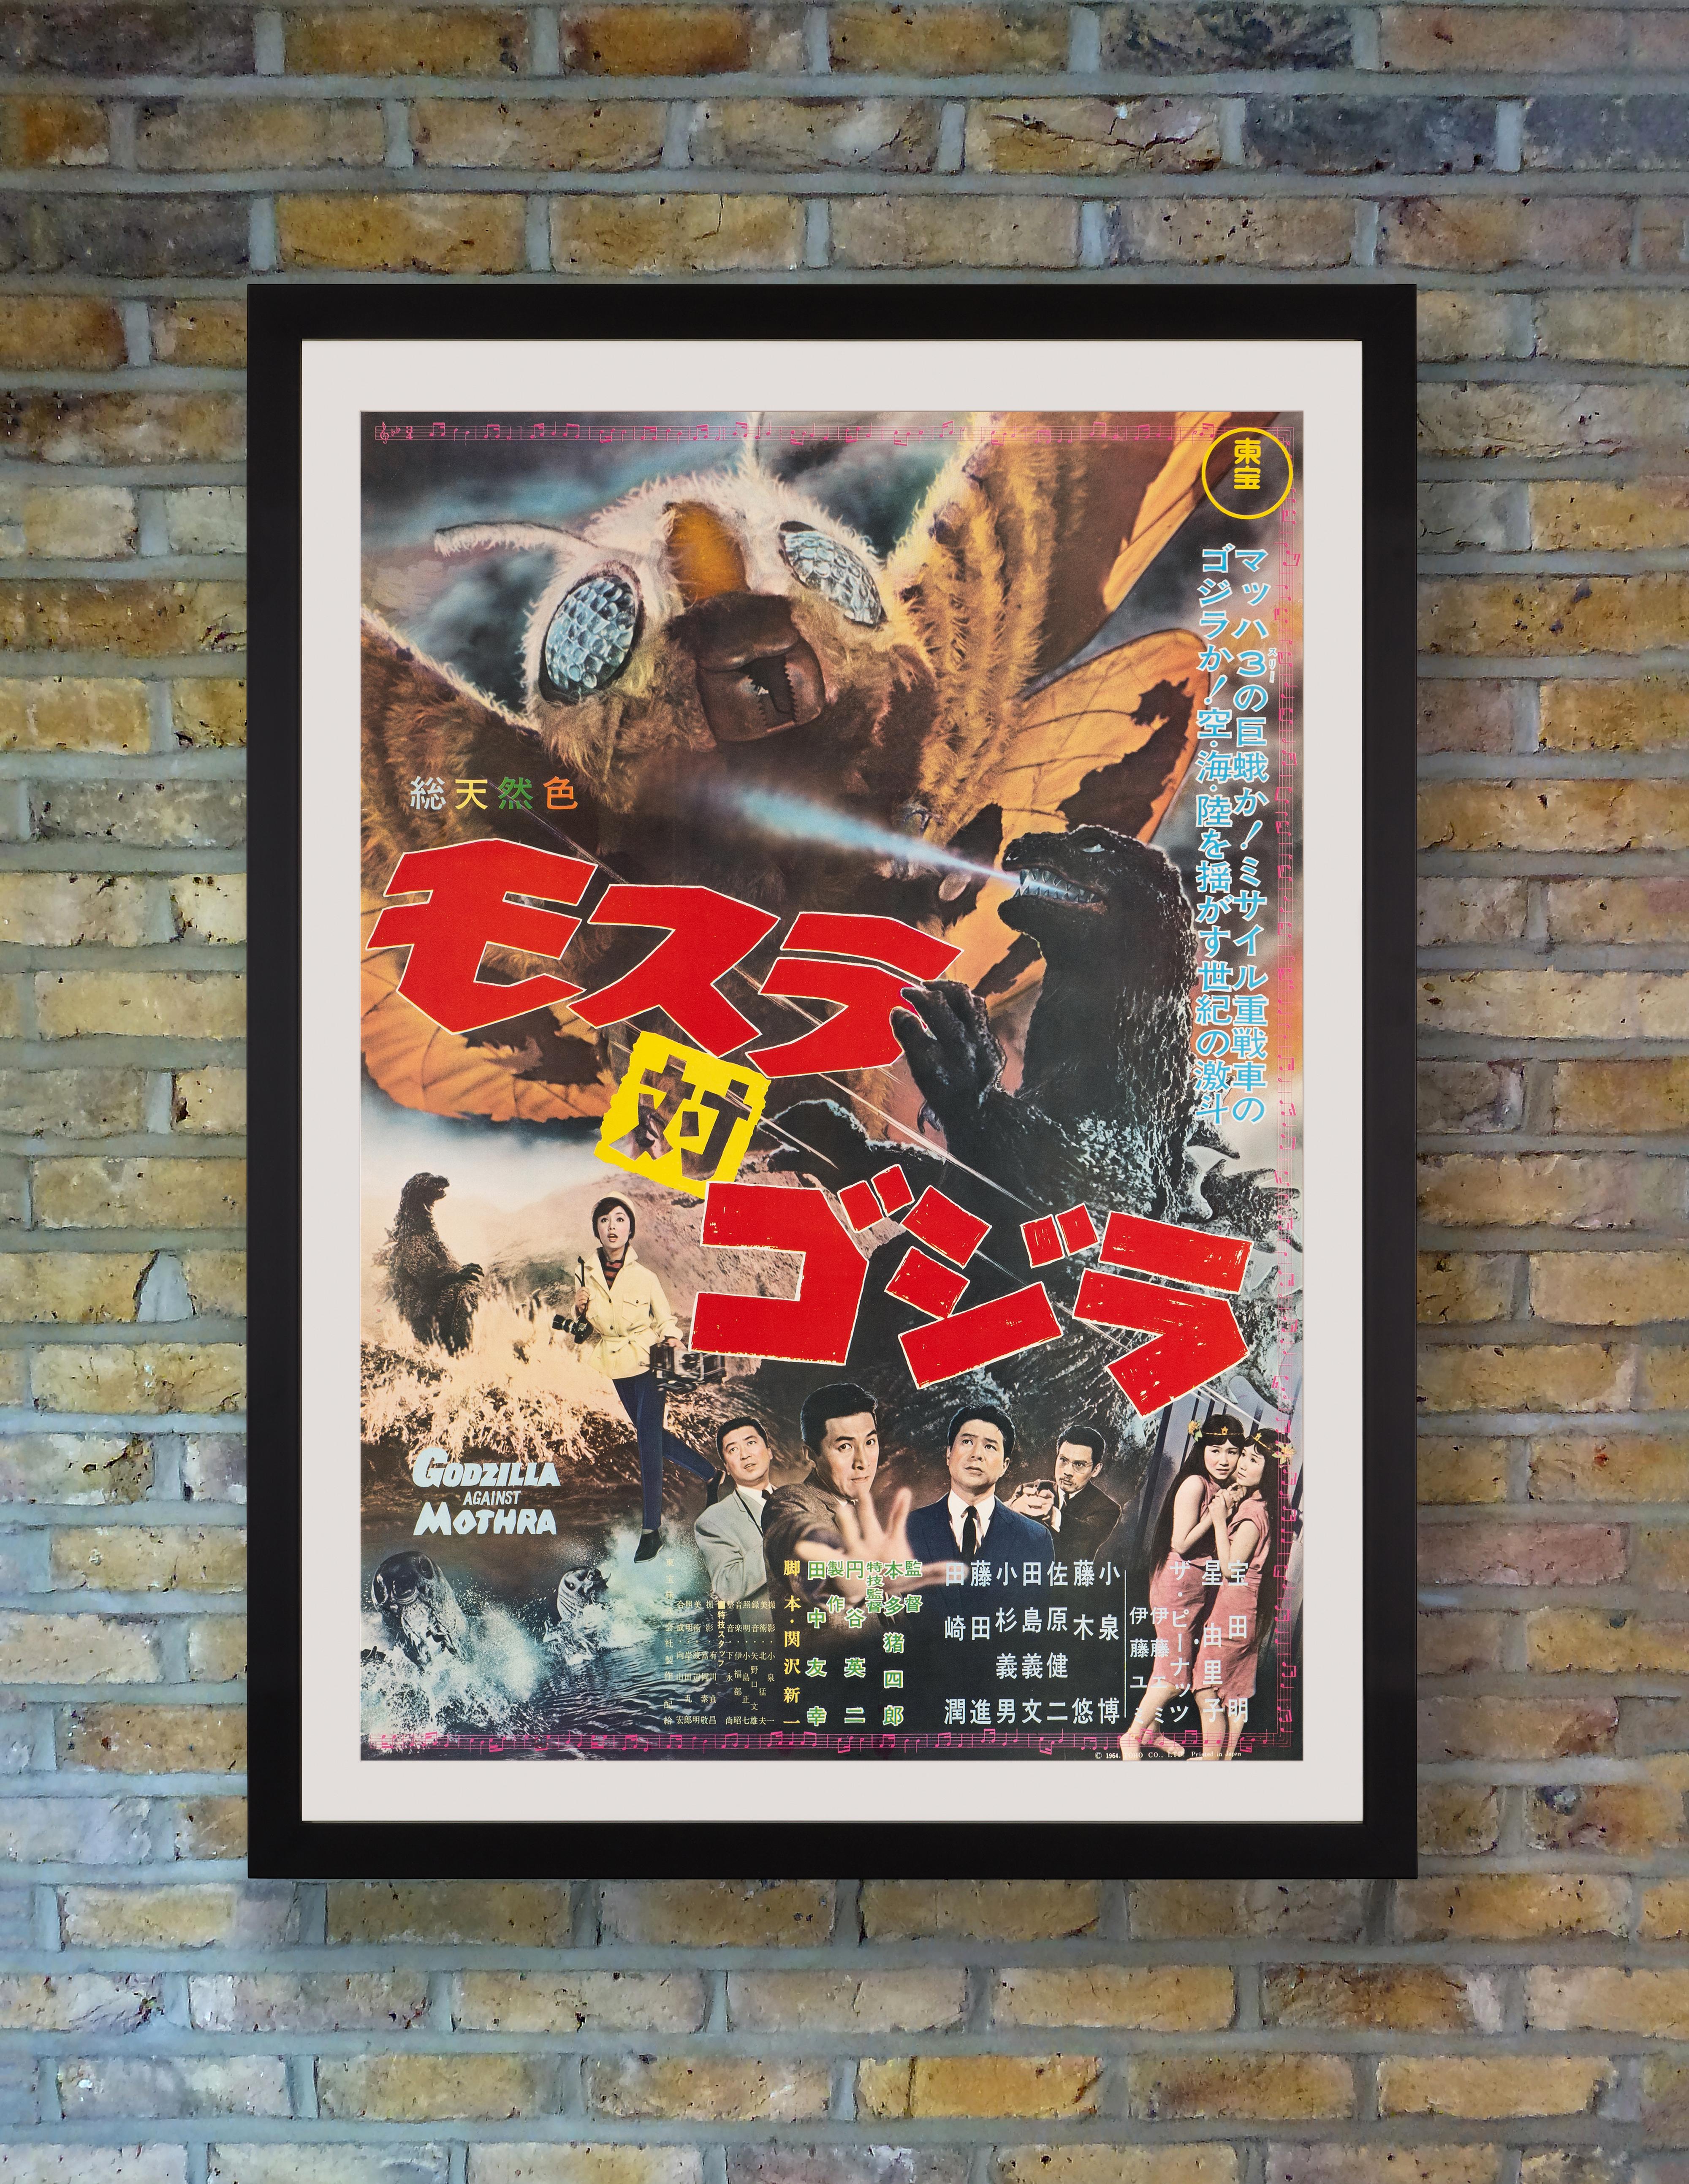 Giant moth-god Mothra takes on the King of the Monsters on this dynamic Japanese B2 poster for the original 1964 release of Ishiro Honda's kaiju classic 'Mothra vs. Godzilla.'

Inspired by a successful 1952 re-release of 1933’s US monster